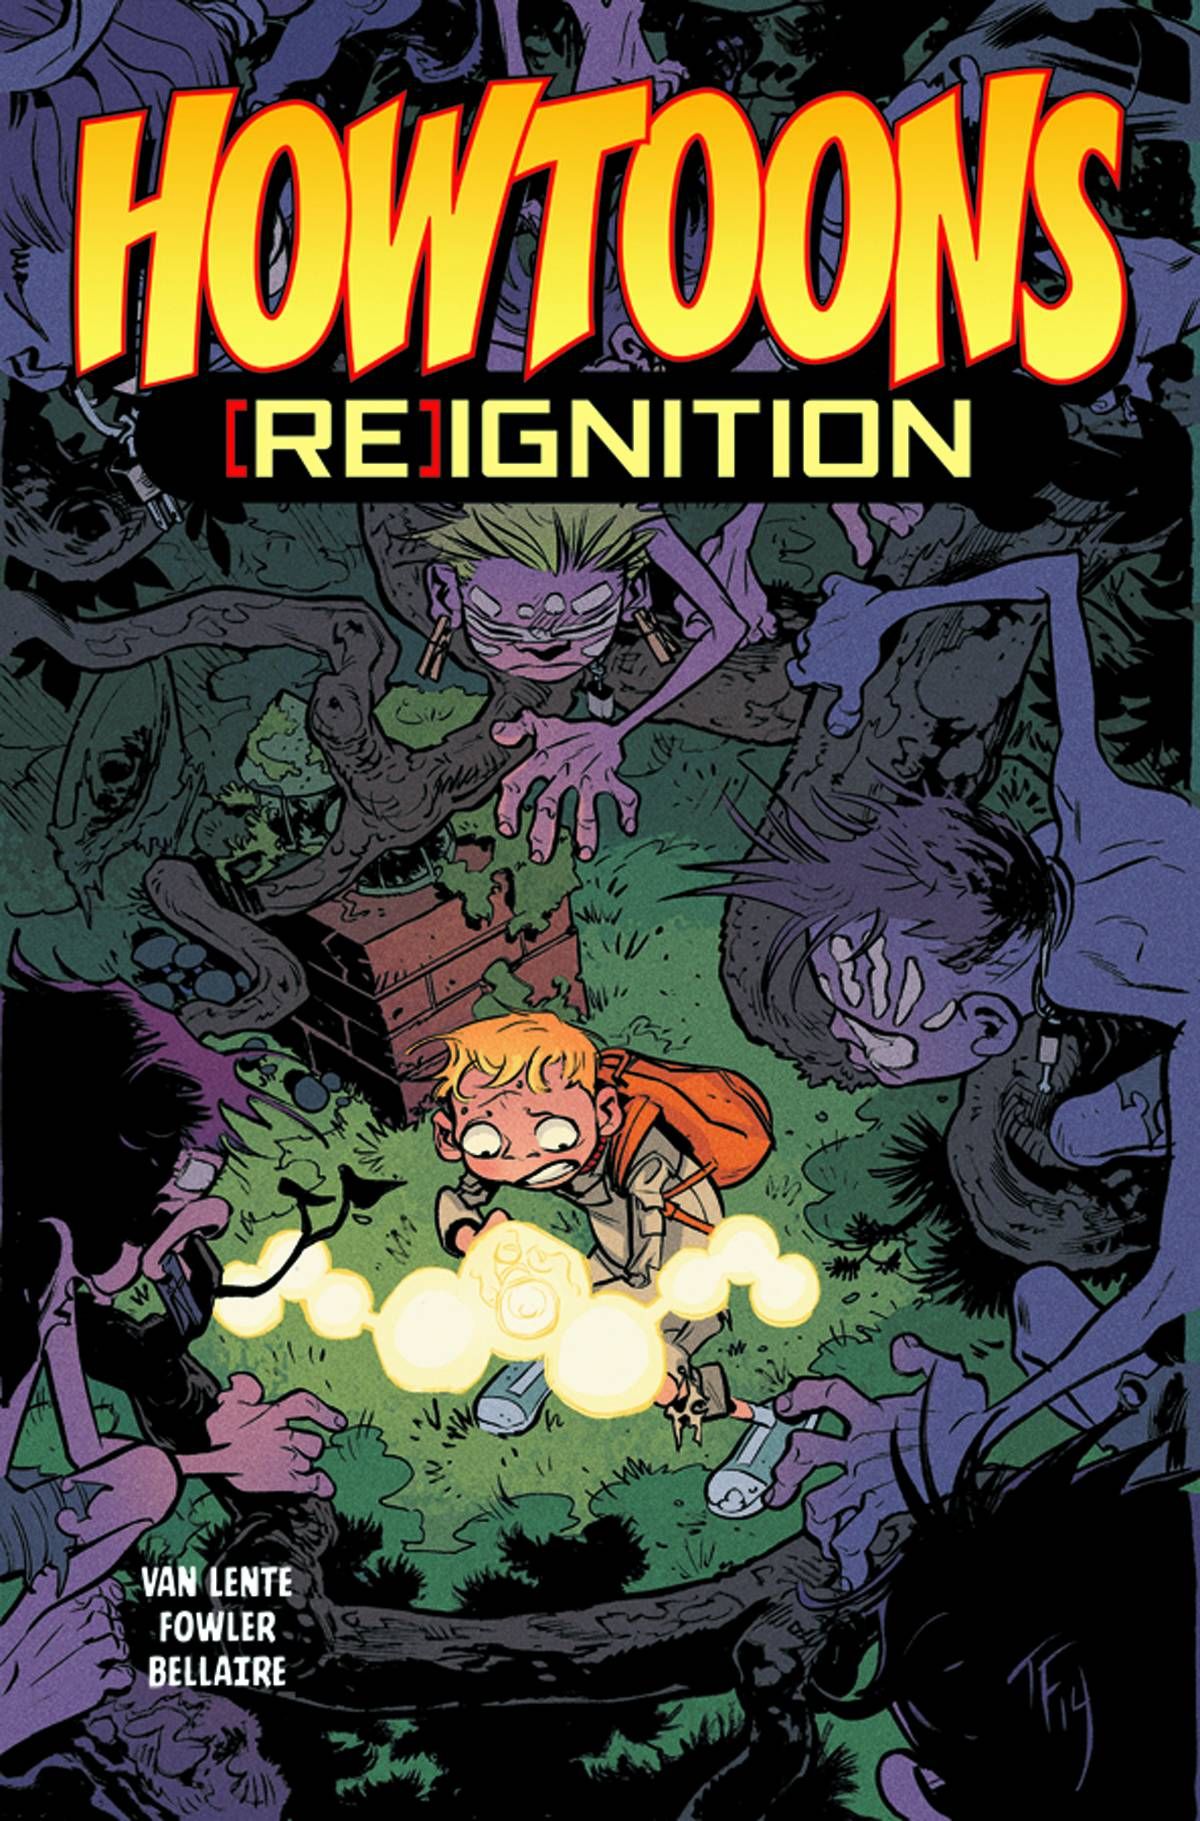 Howtoons Reignition #3 Comic